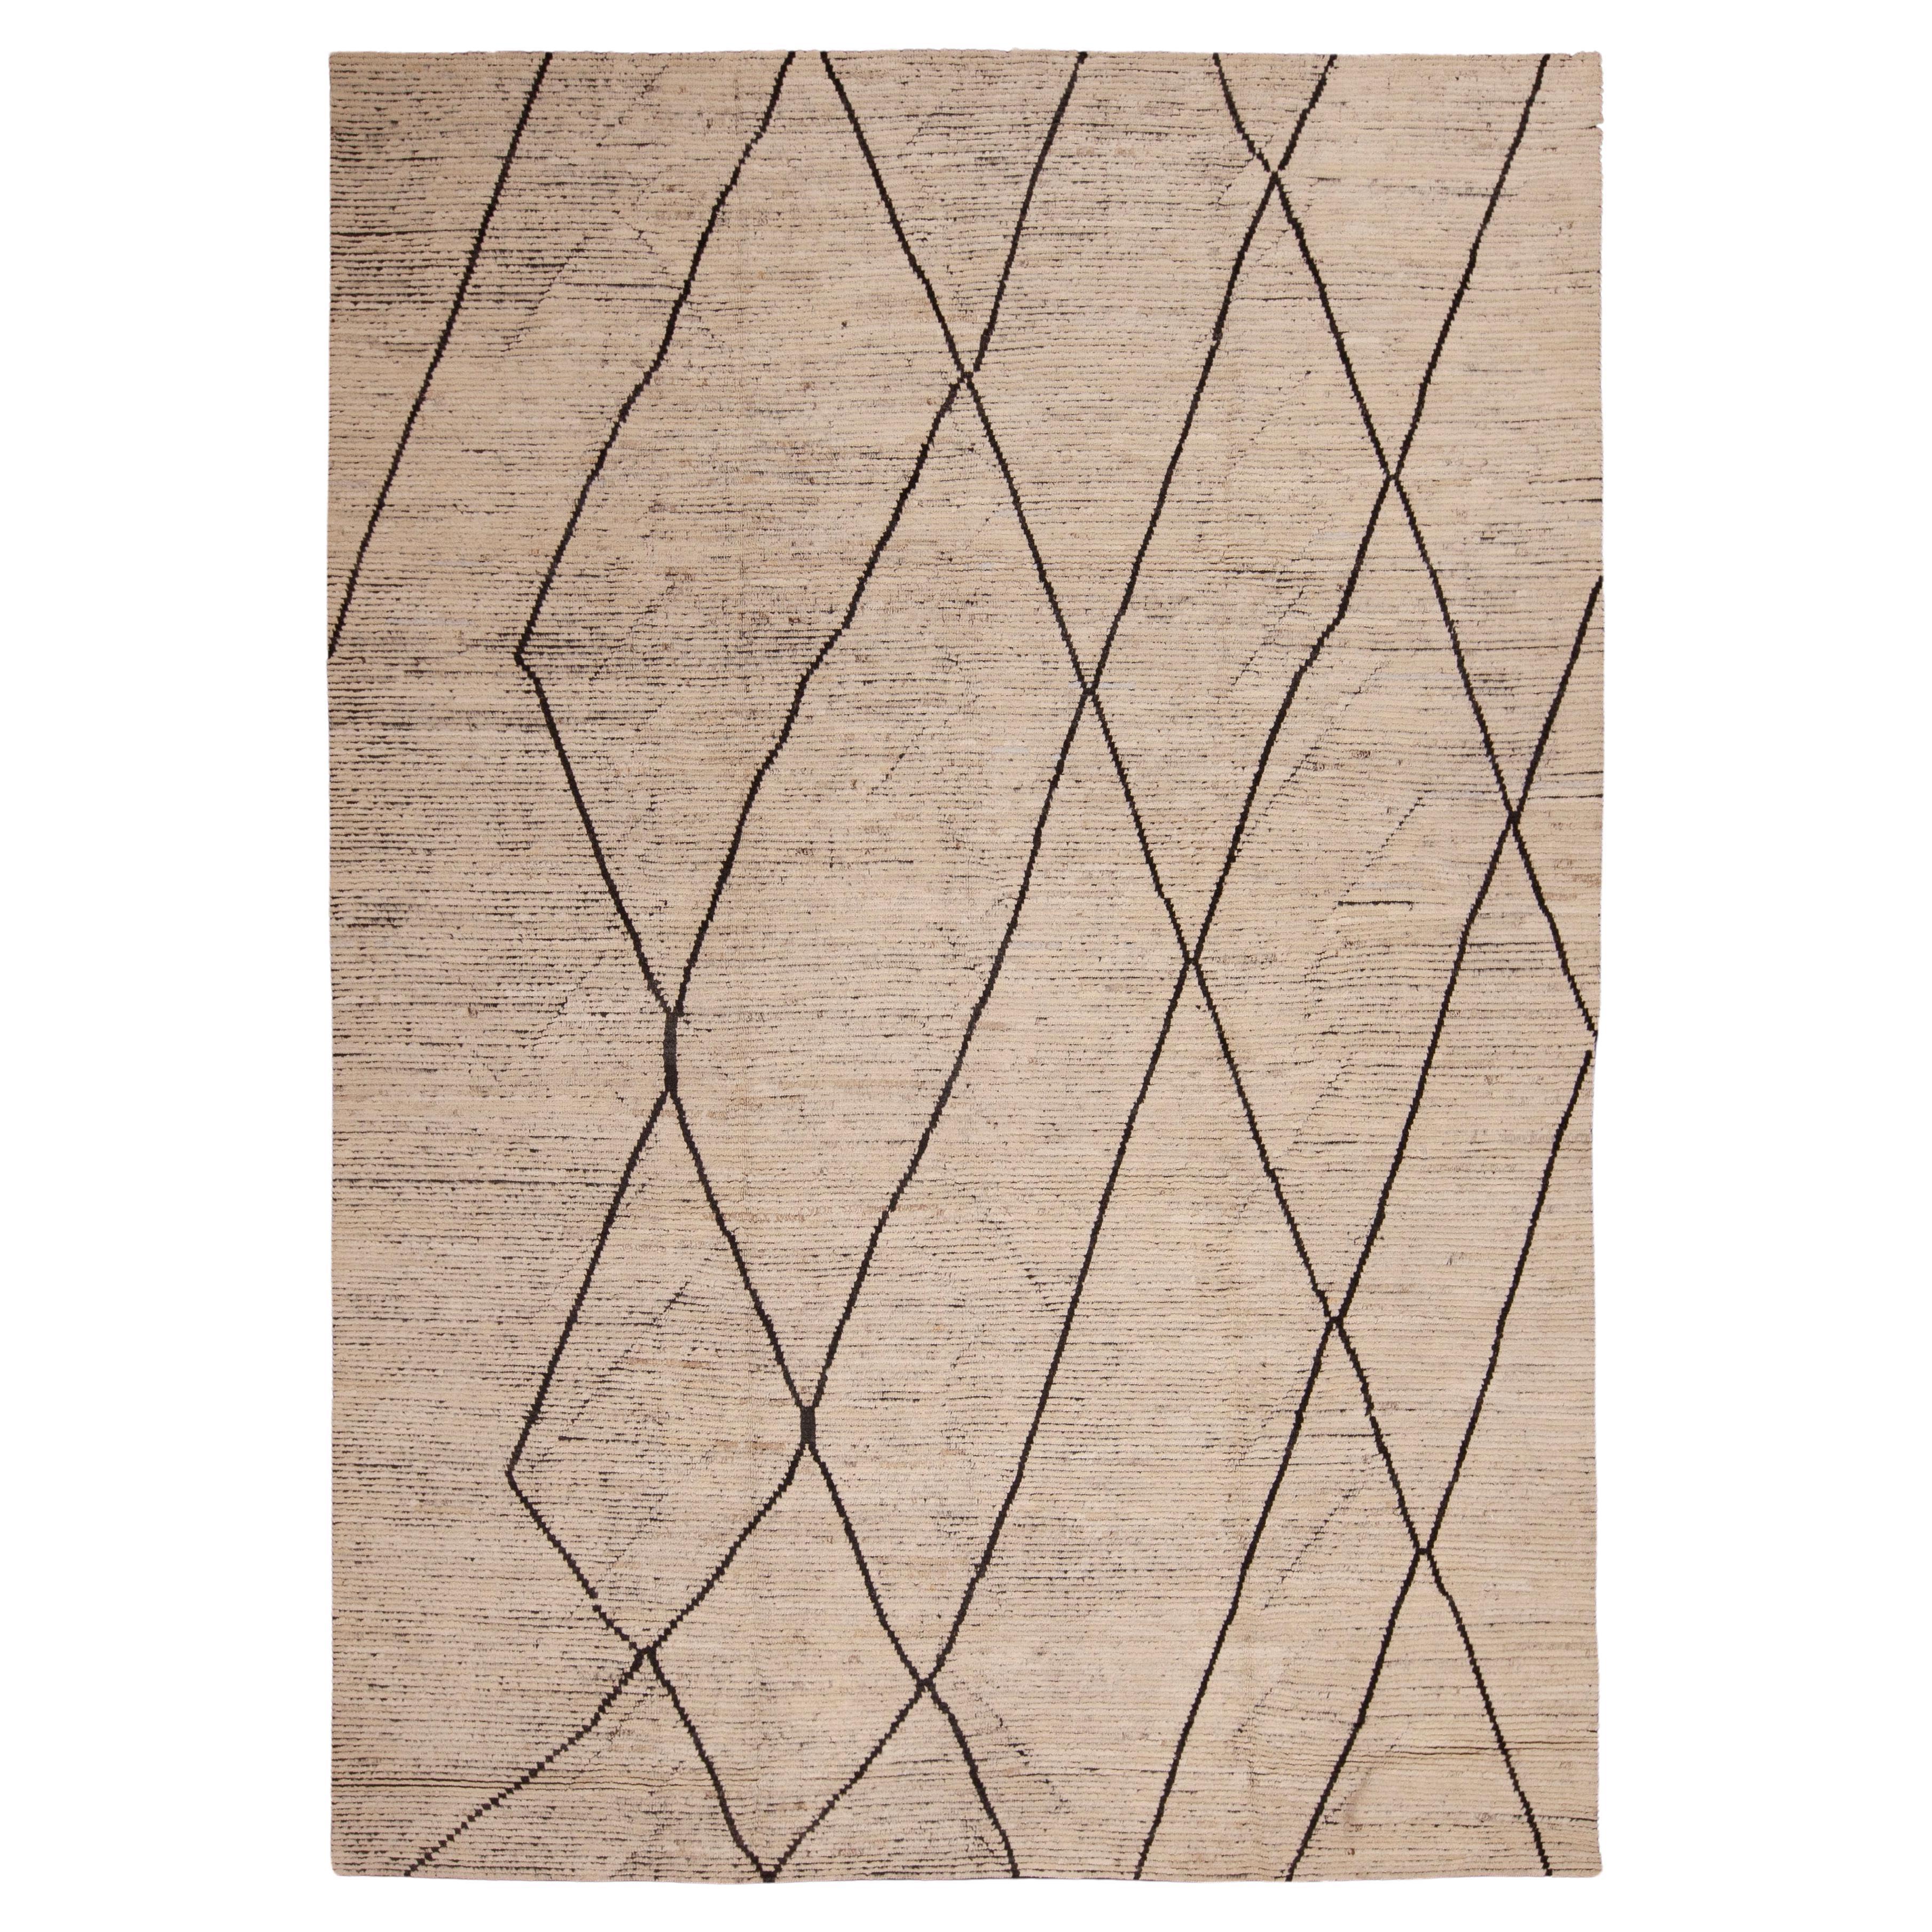 Nazmiyal Collection Moroccan Beni Ourain Design Modern Room Size Rug 9' x 12'4" For Sale